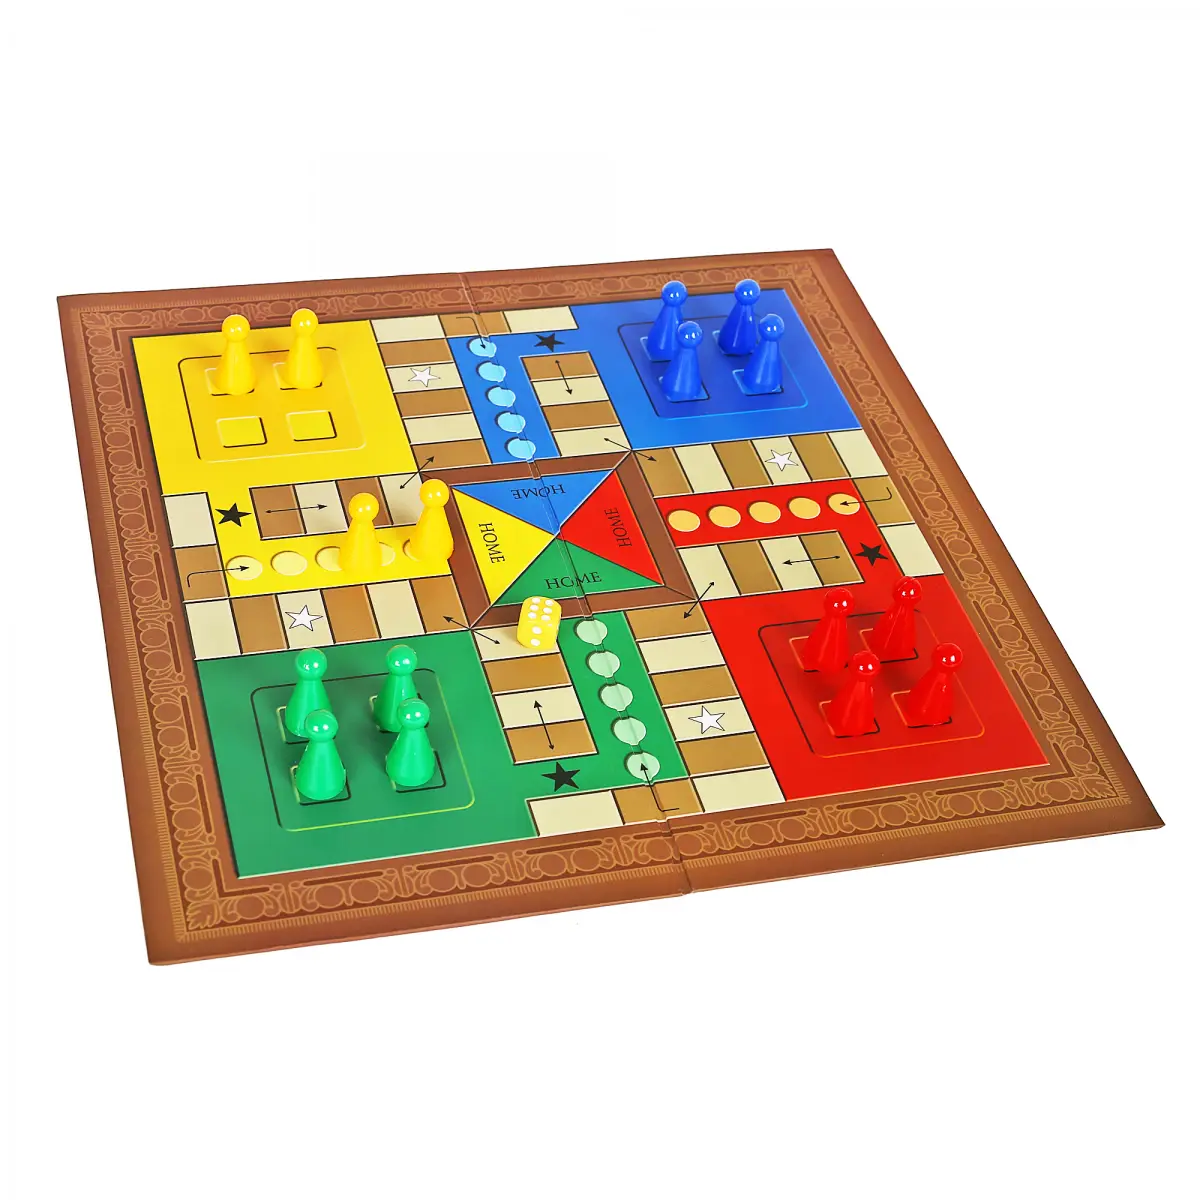 Youreka 2 In 1 Ludo and Snakes & Ladders, 3Y+, Multicolour